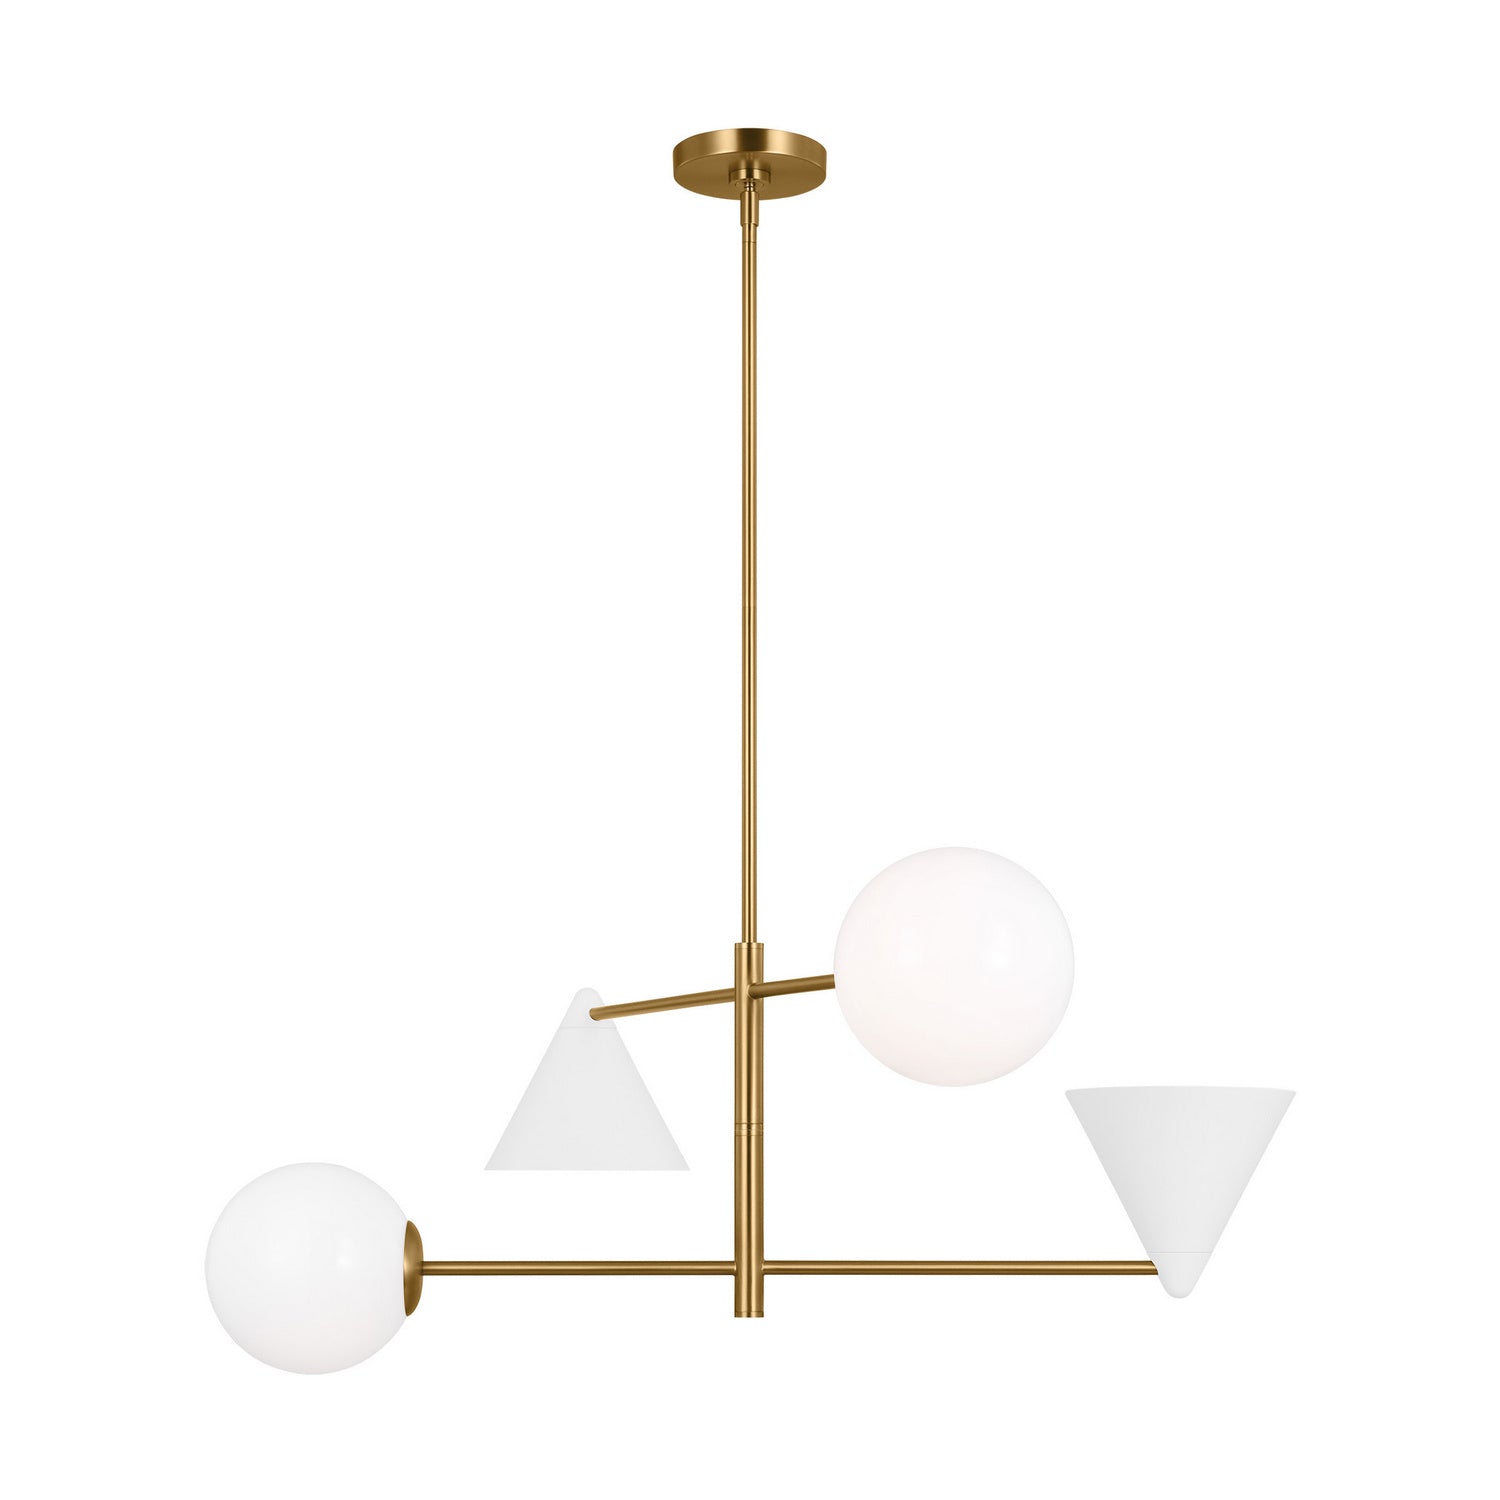 Visual Comfort Studio Canada - Four Light Chandelier - Cosmo - Matte White and Burnished Brass- Union Lighting Luminaires Decor